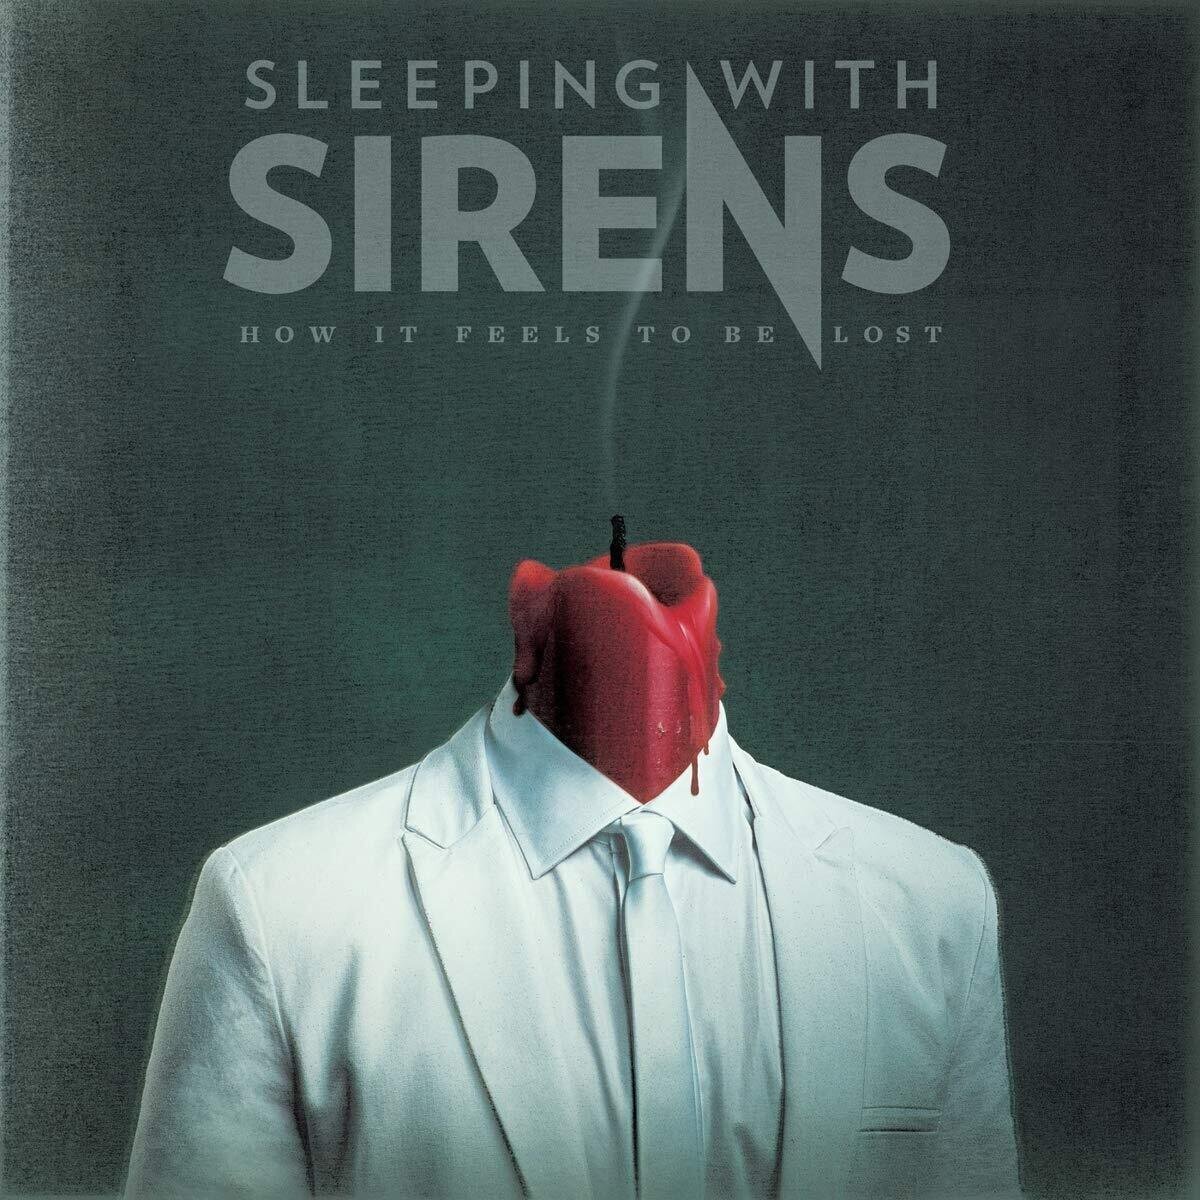 Vinylplade Sleeping With Sirens - How It Feels To Be Lost (White/Pink Splatter) (LP)